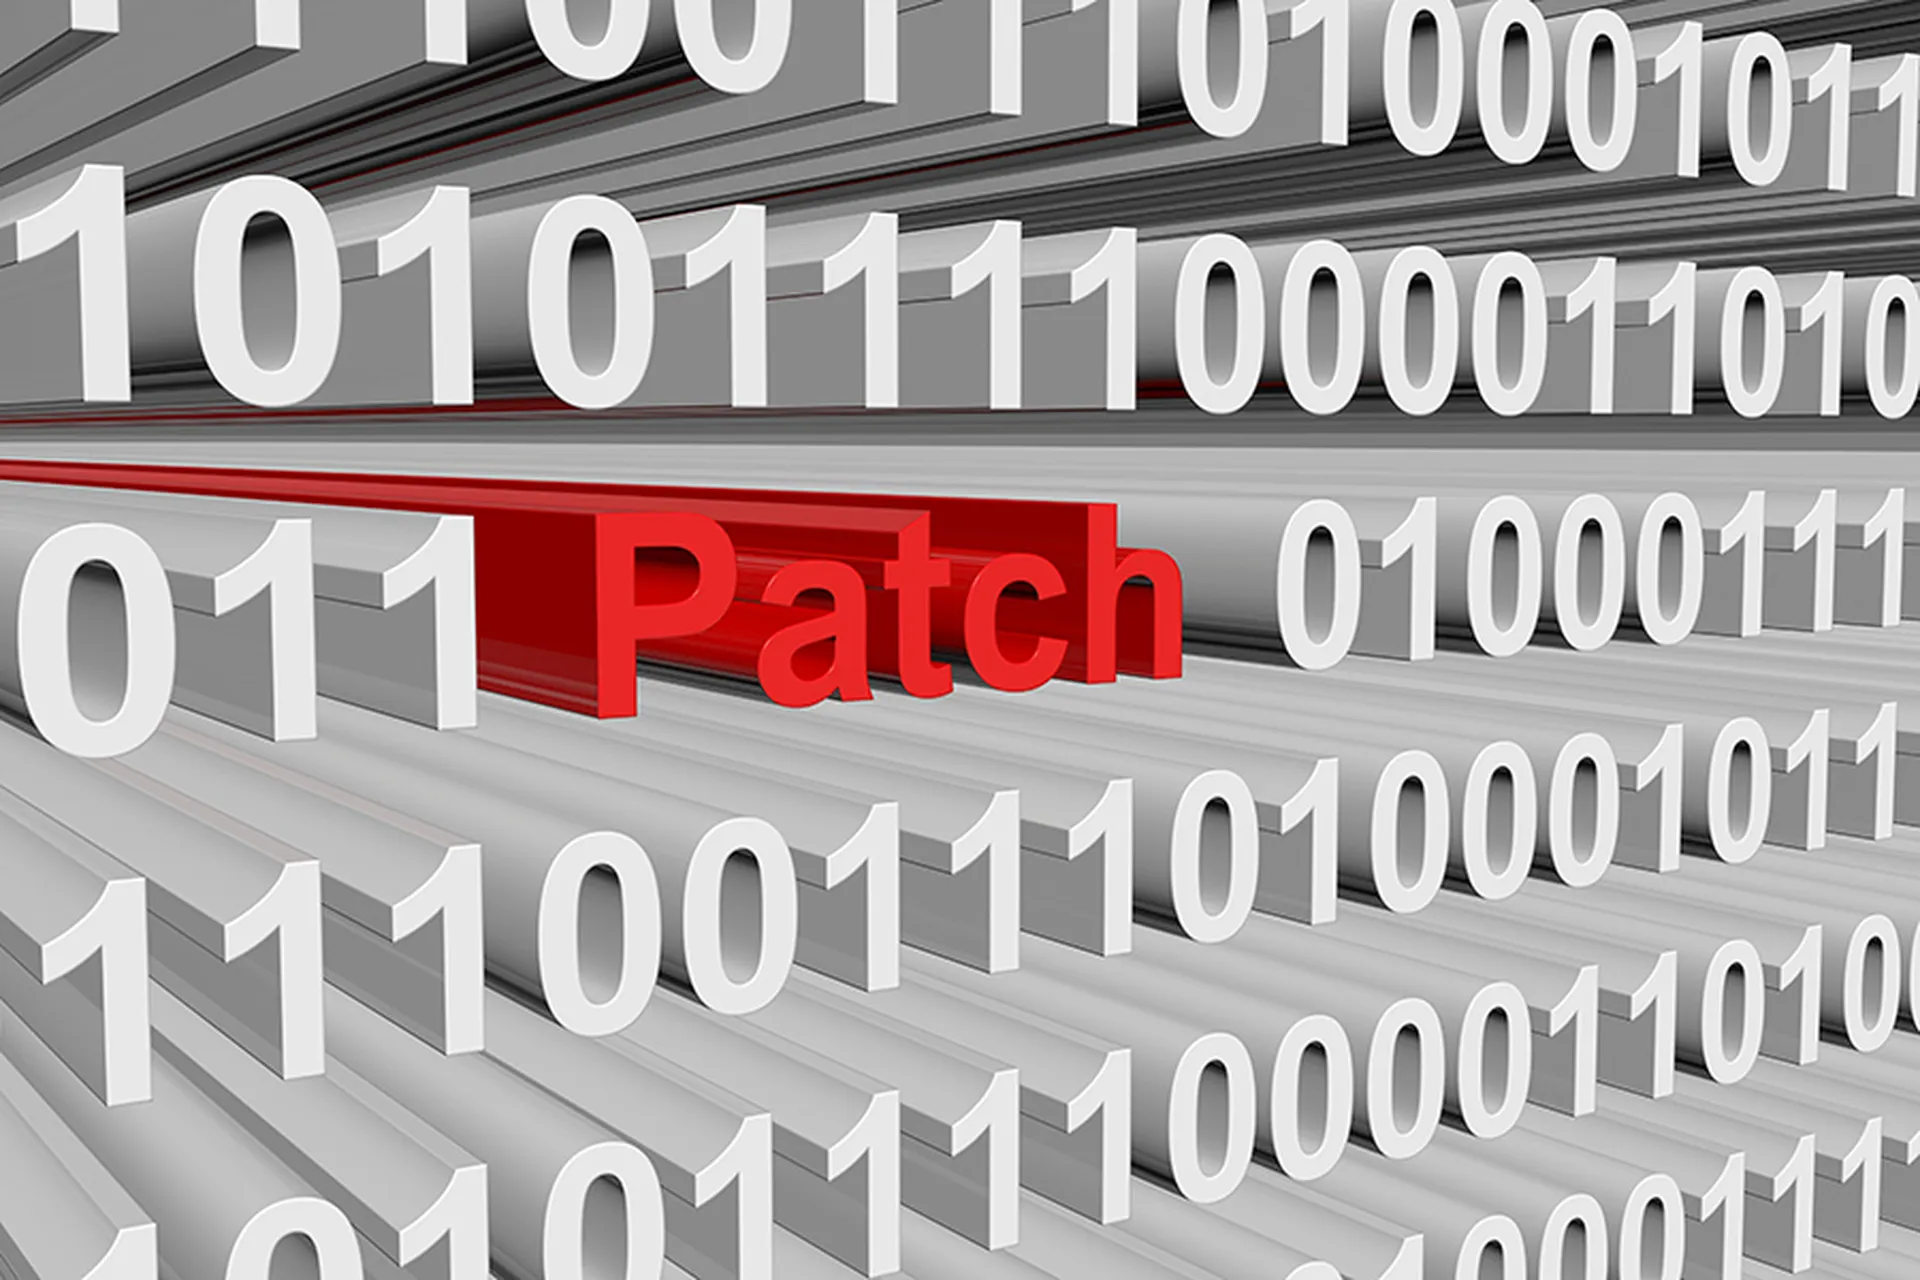 patch presented in the form of binary code